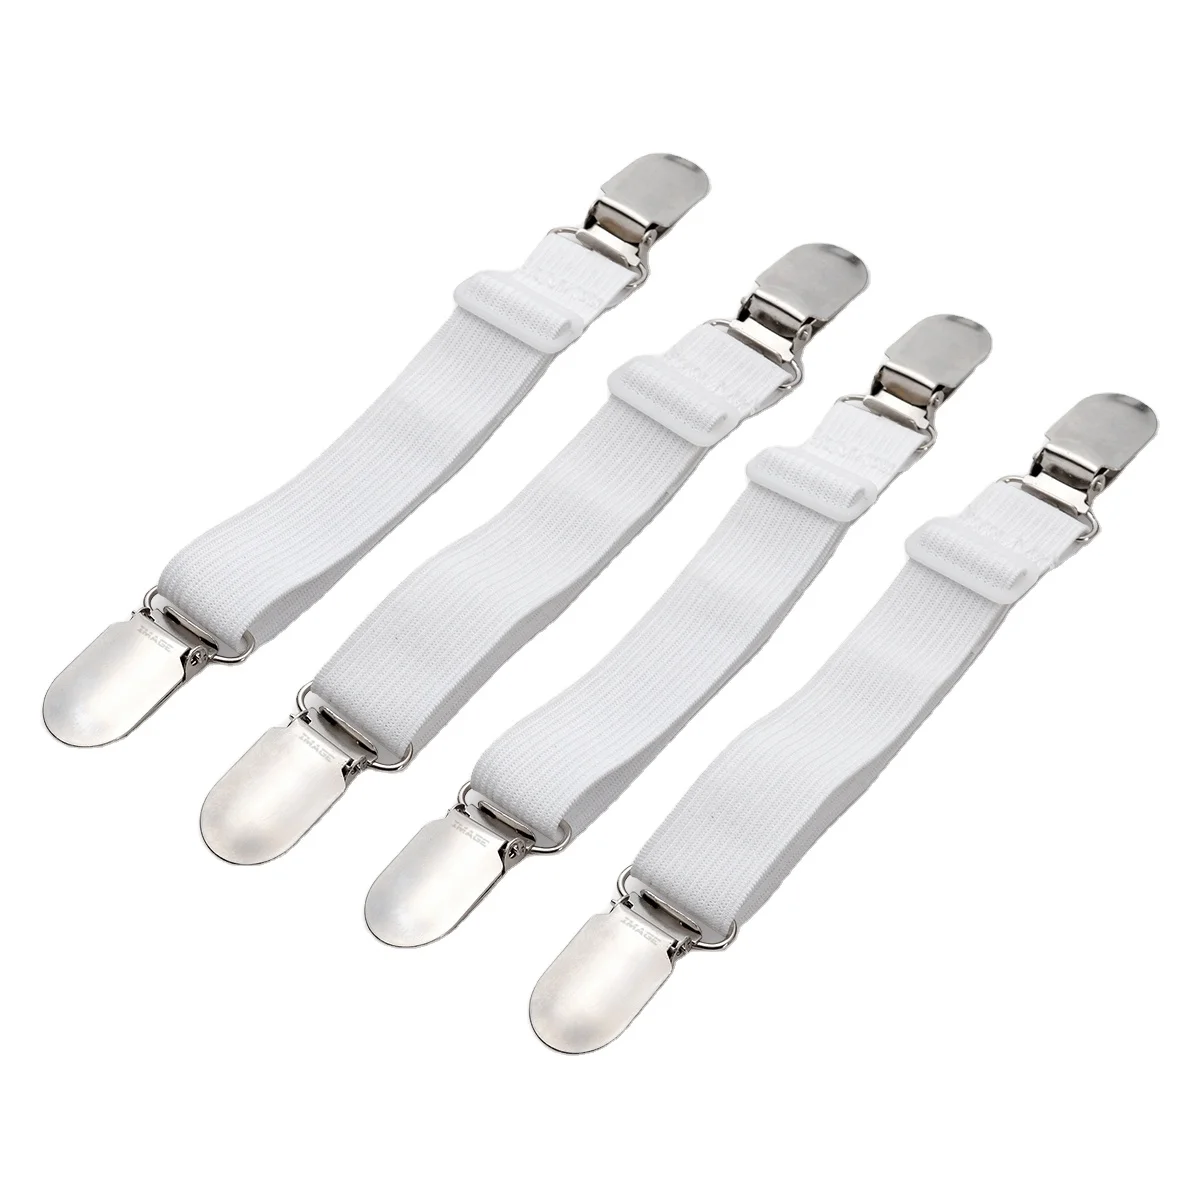 The Bed Sheet Holder Band Approach for Keeping on Your Mattress Clips  Grippers for sale online